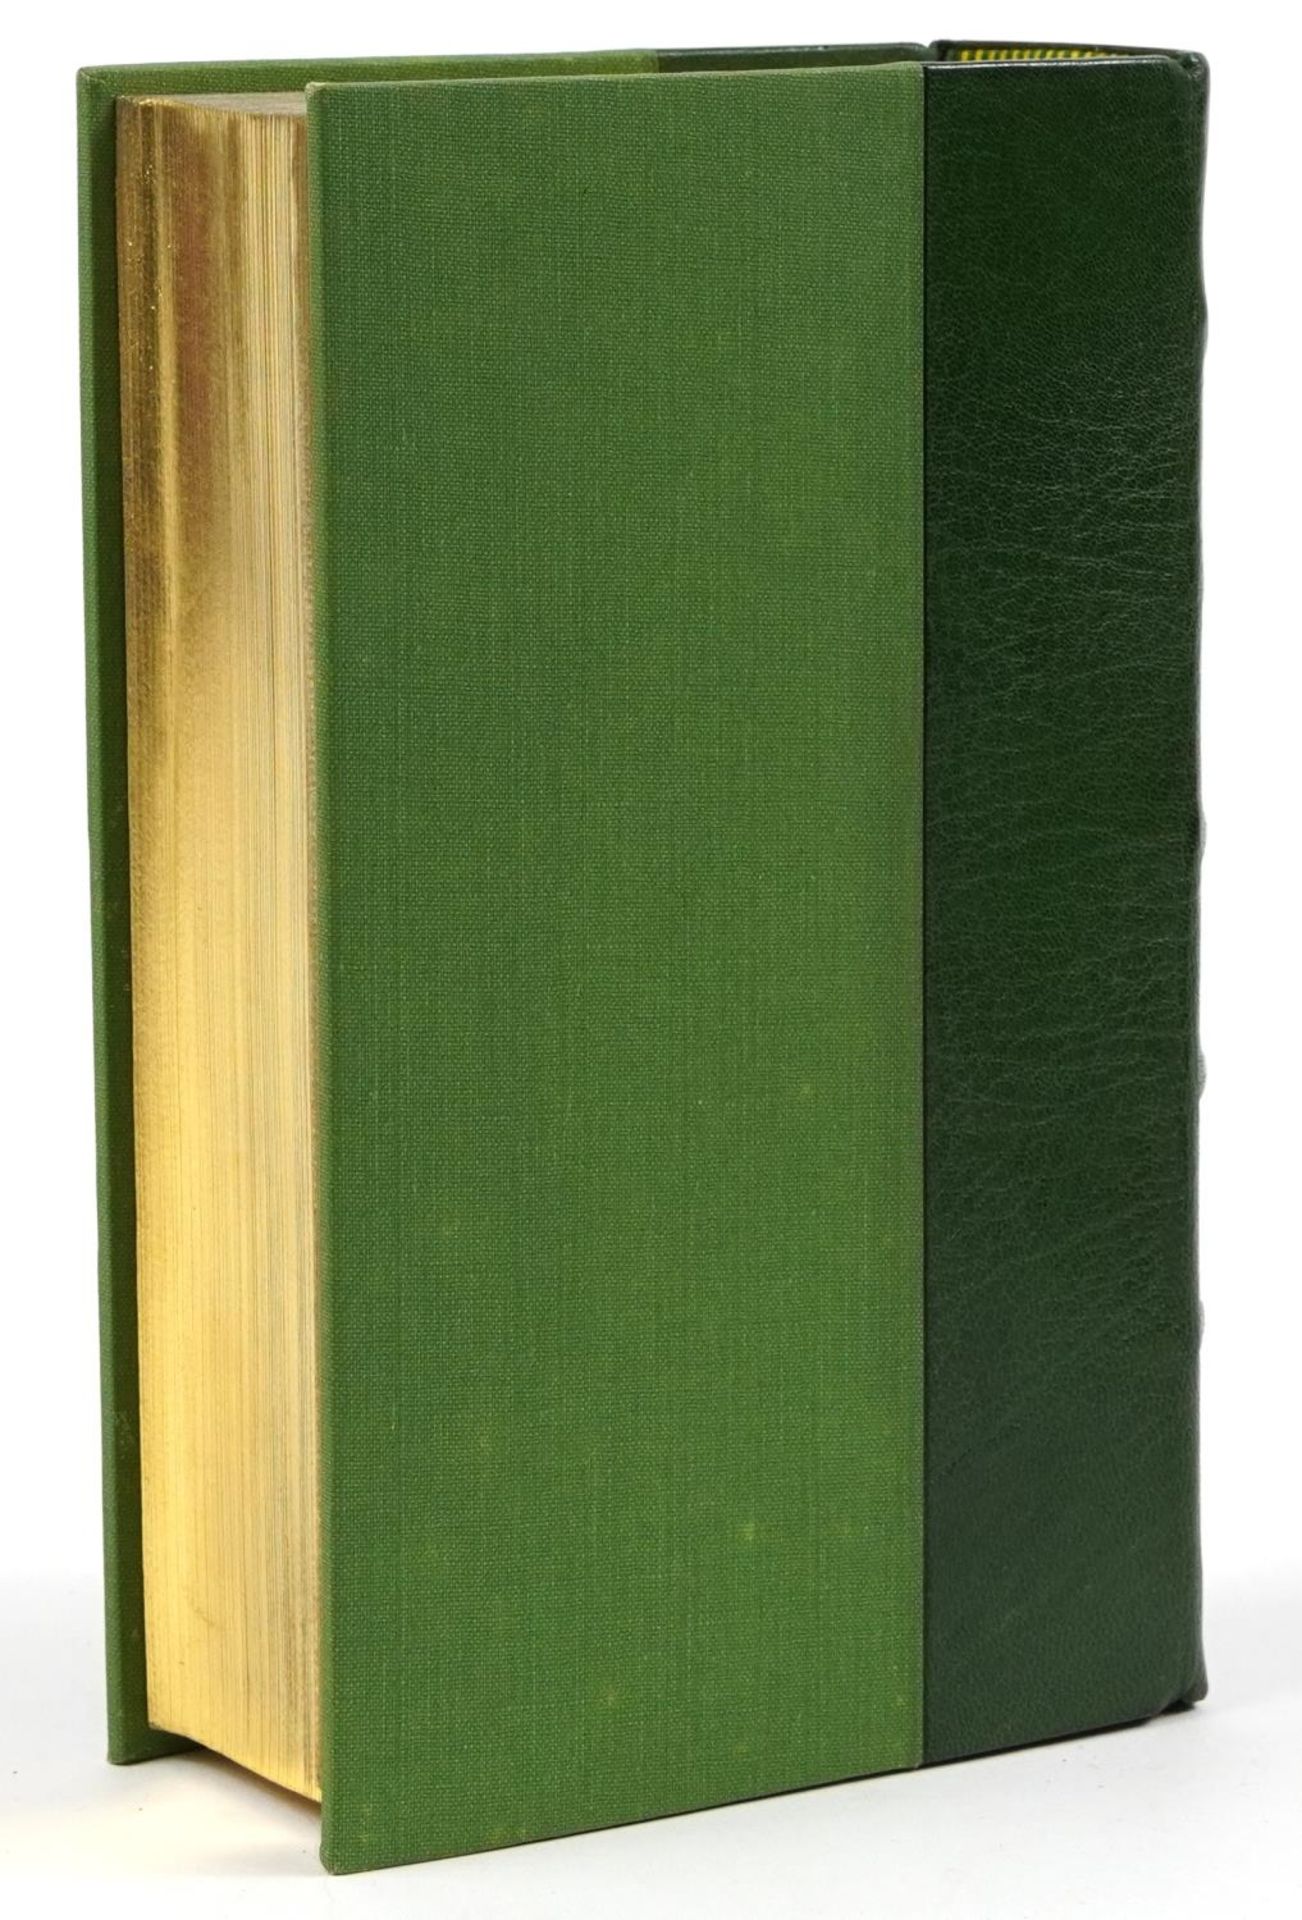 The Pickwick Papers, leather bound, gilt edged book, Nottingham Court press in association with - Image 6 of 6